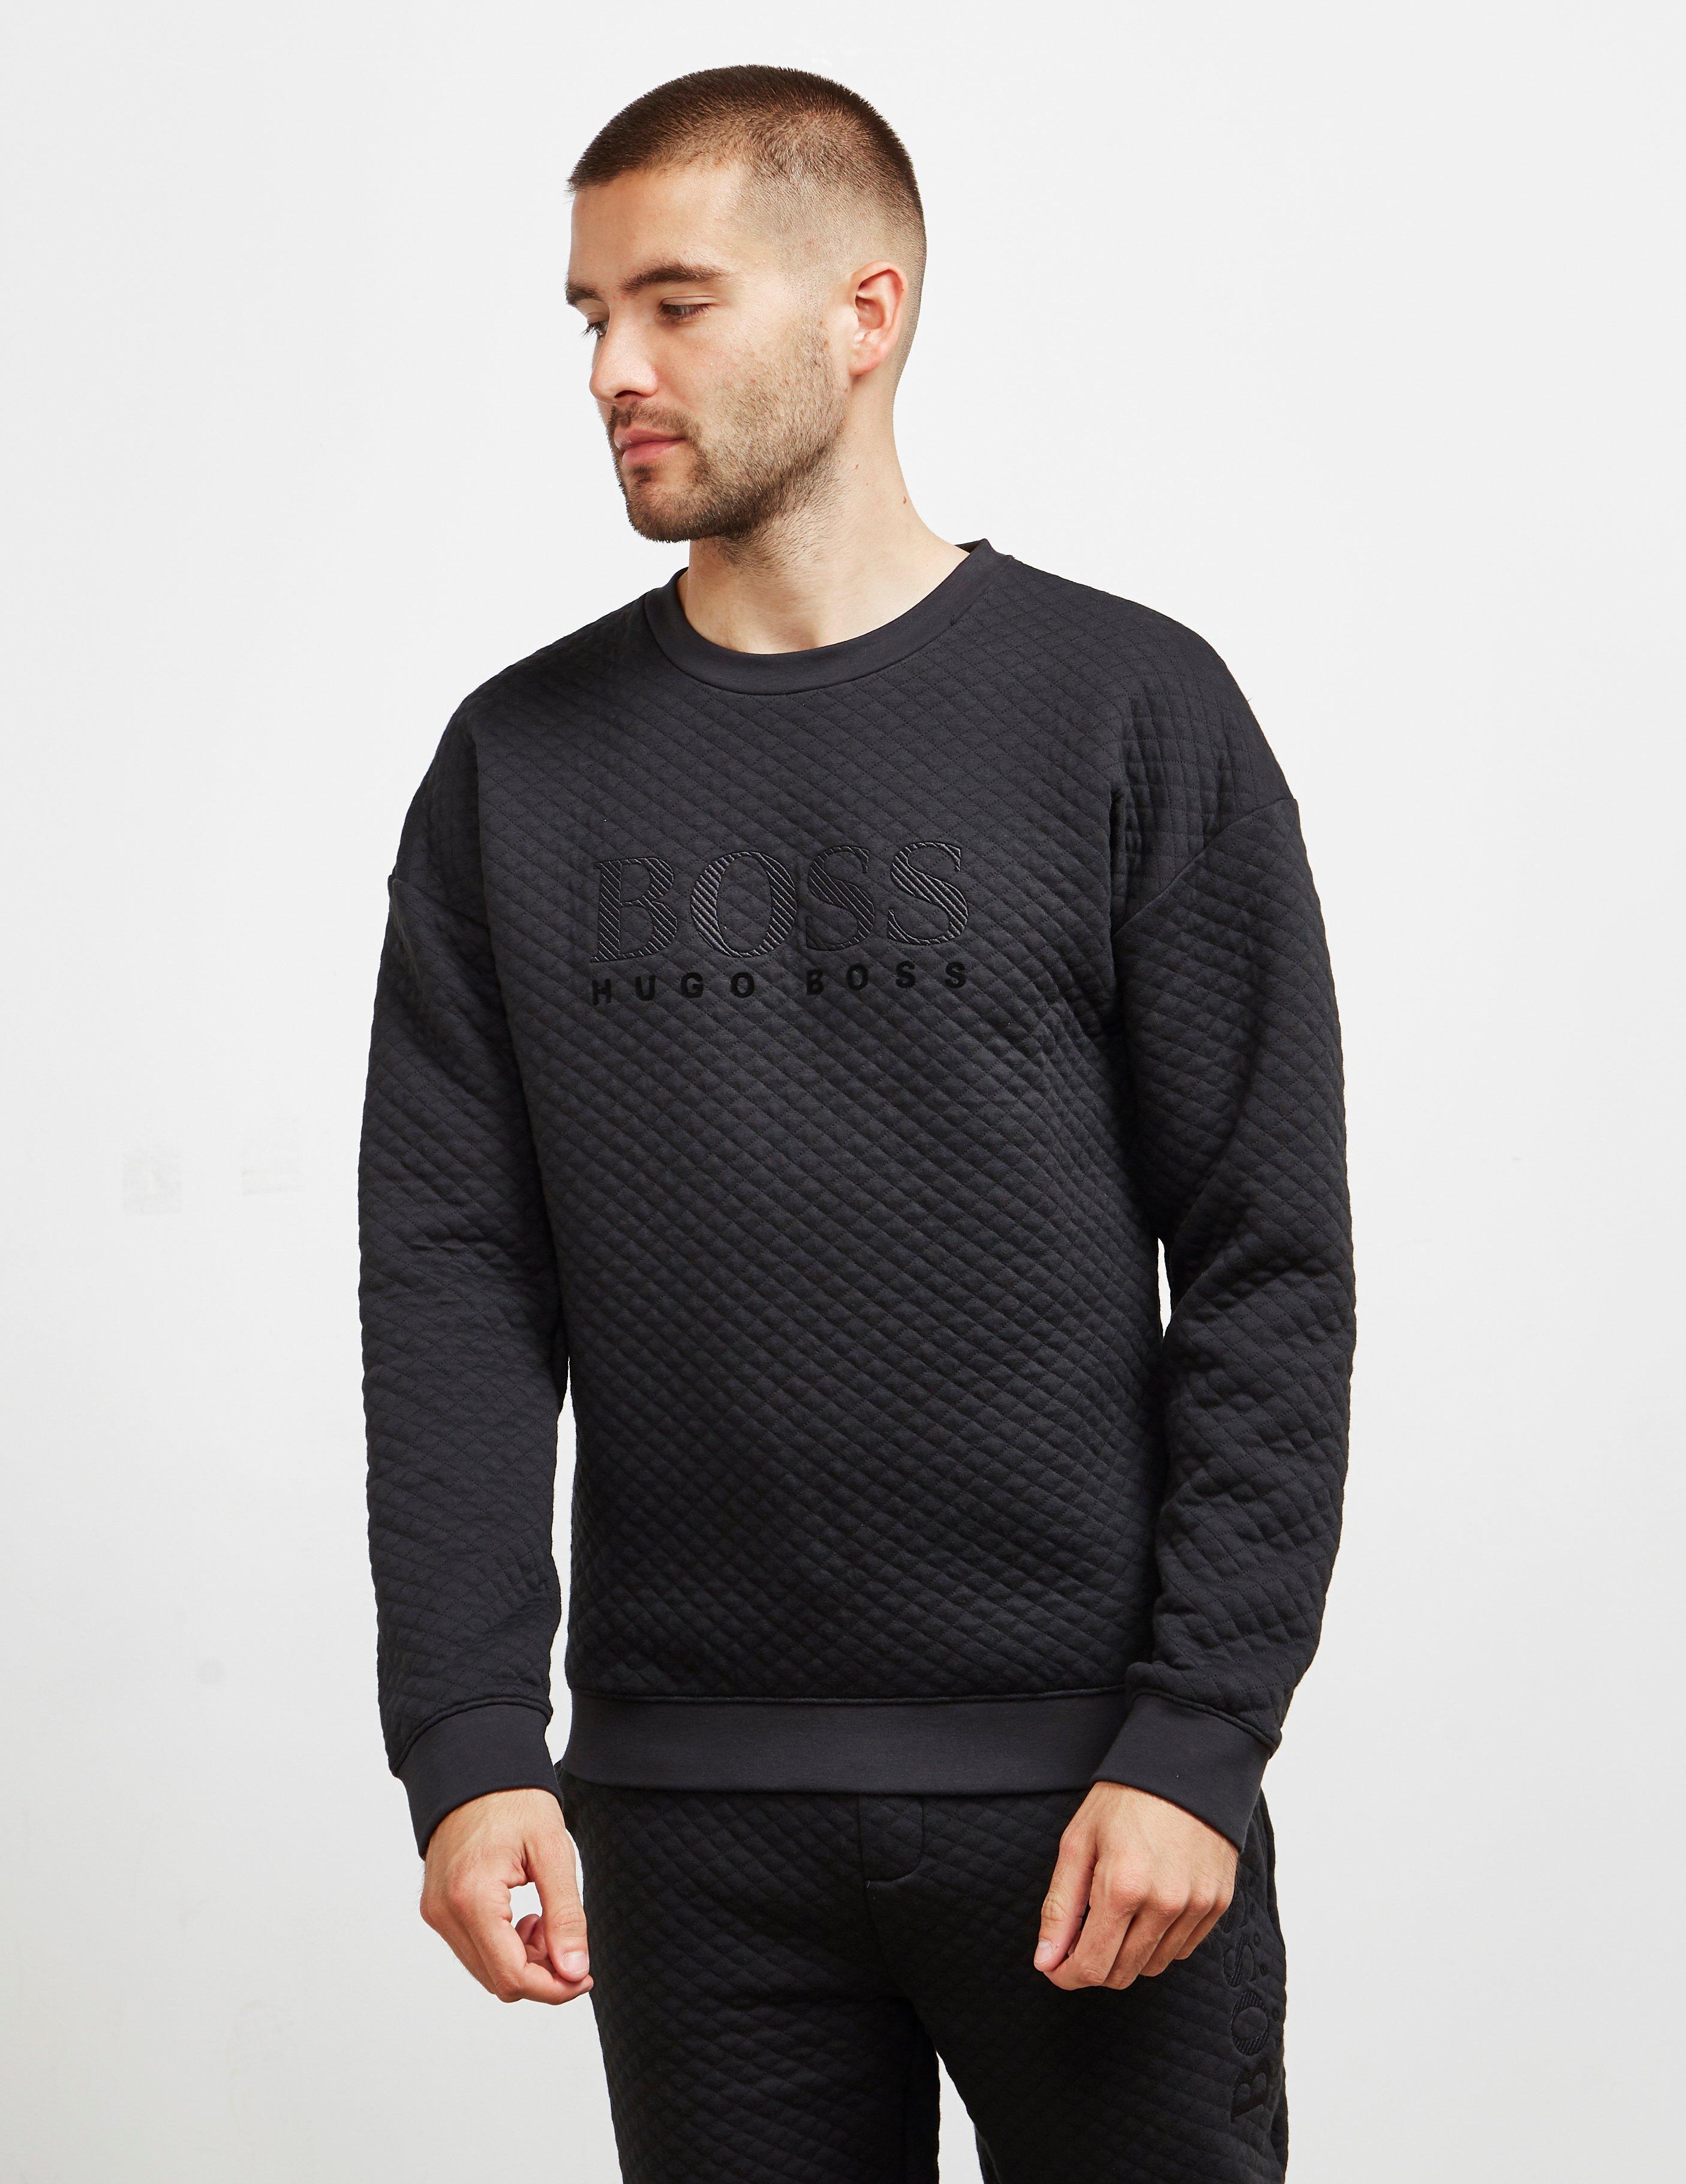 BOSS by HUGO BOSS Quilted Embroidered Sweatshirt Black for Men - Lyst